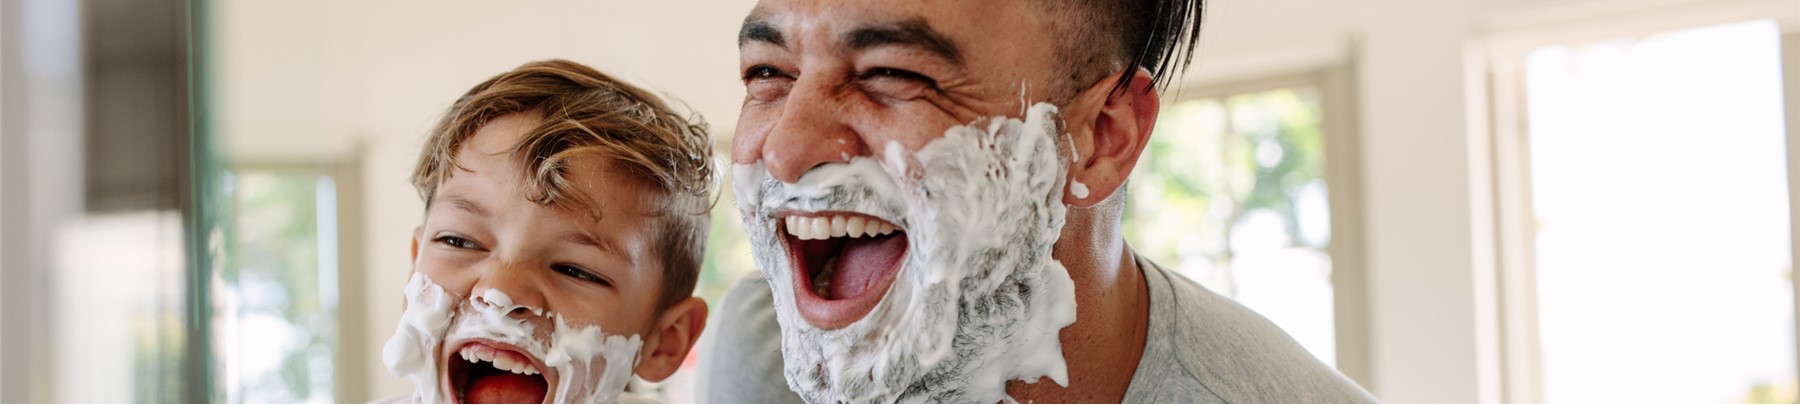 image of dark-haired dad teaching his young son how to shave. They're looking into bathroom mirror, covered with shaving cream and laughing uproariously.